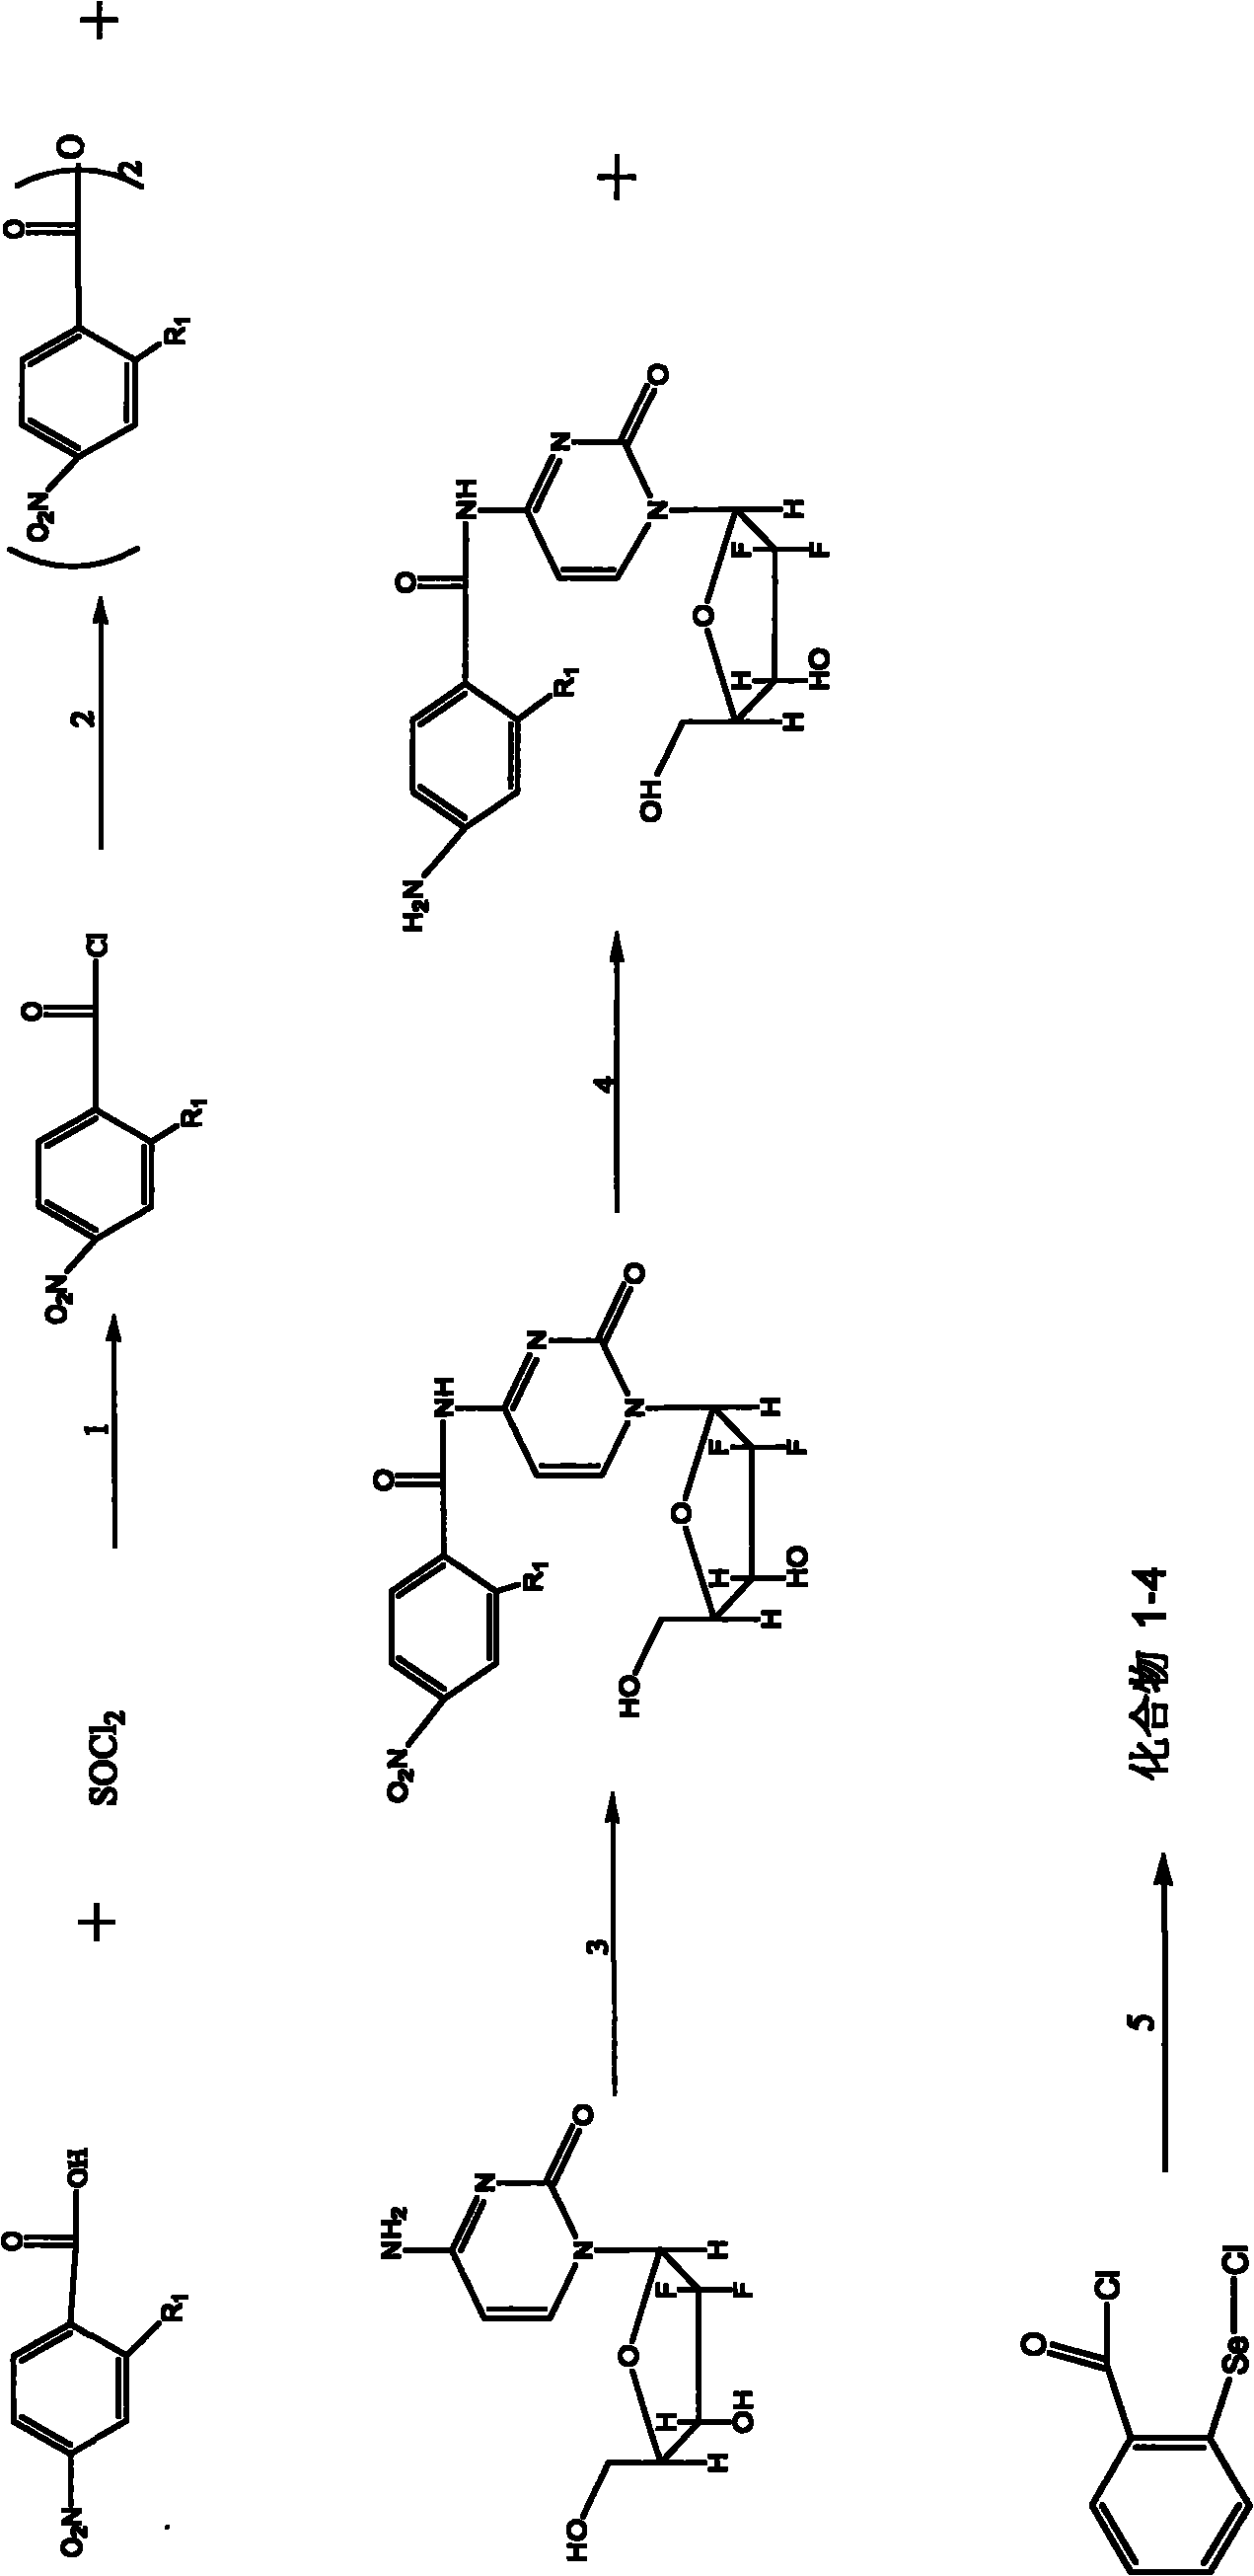 Benzisoselenazolone difluorocytidine compound as well as preparation method and application thereof